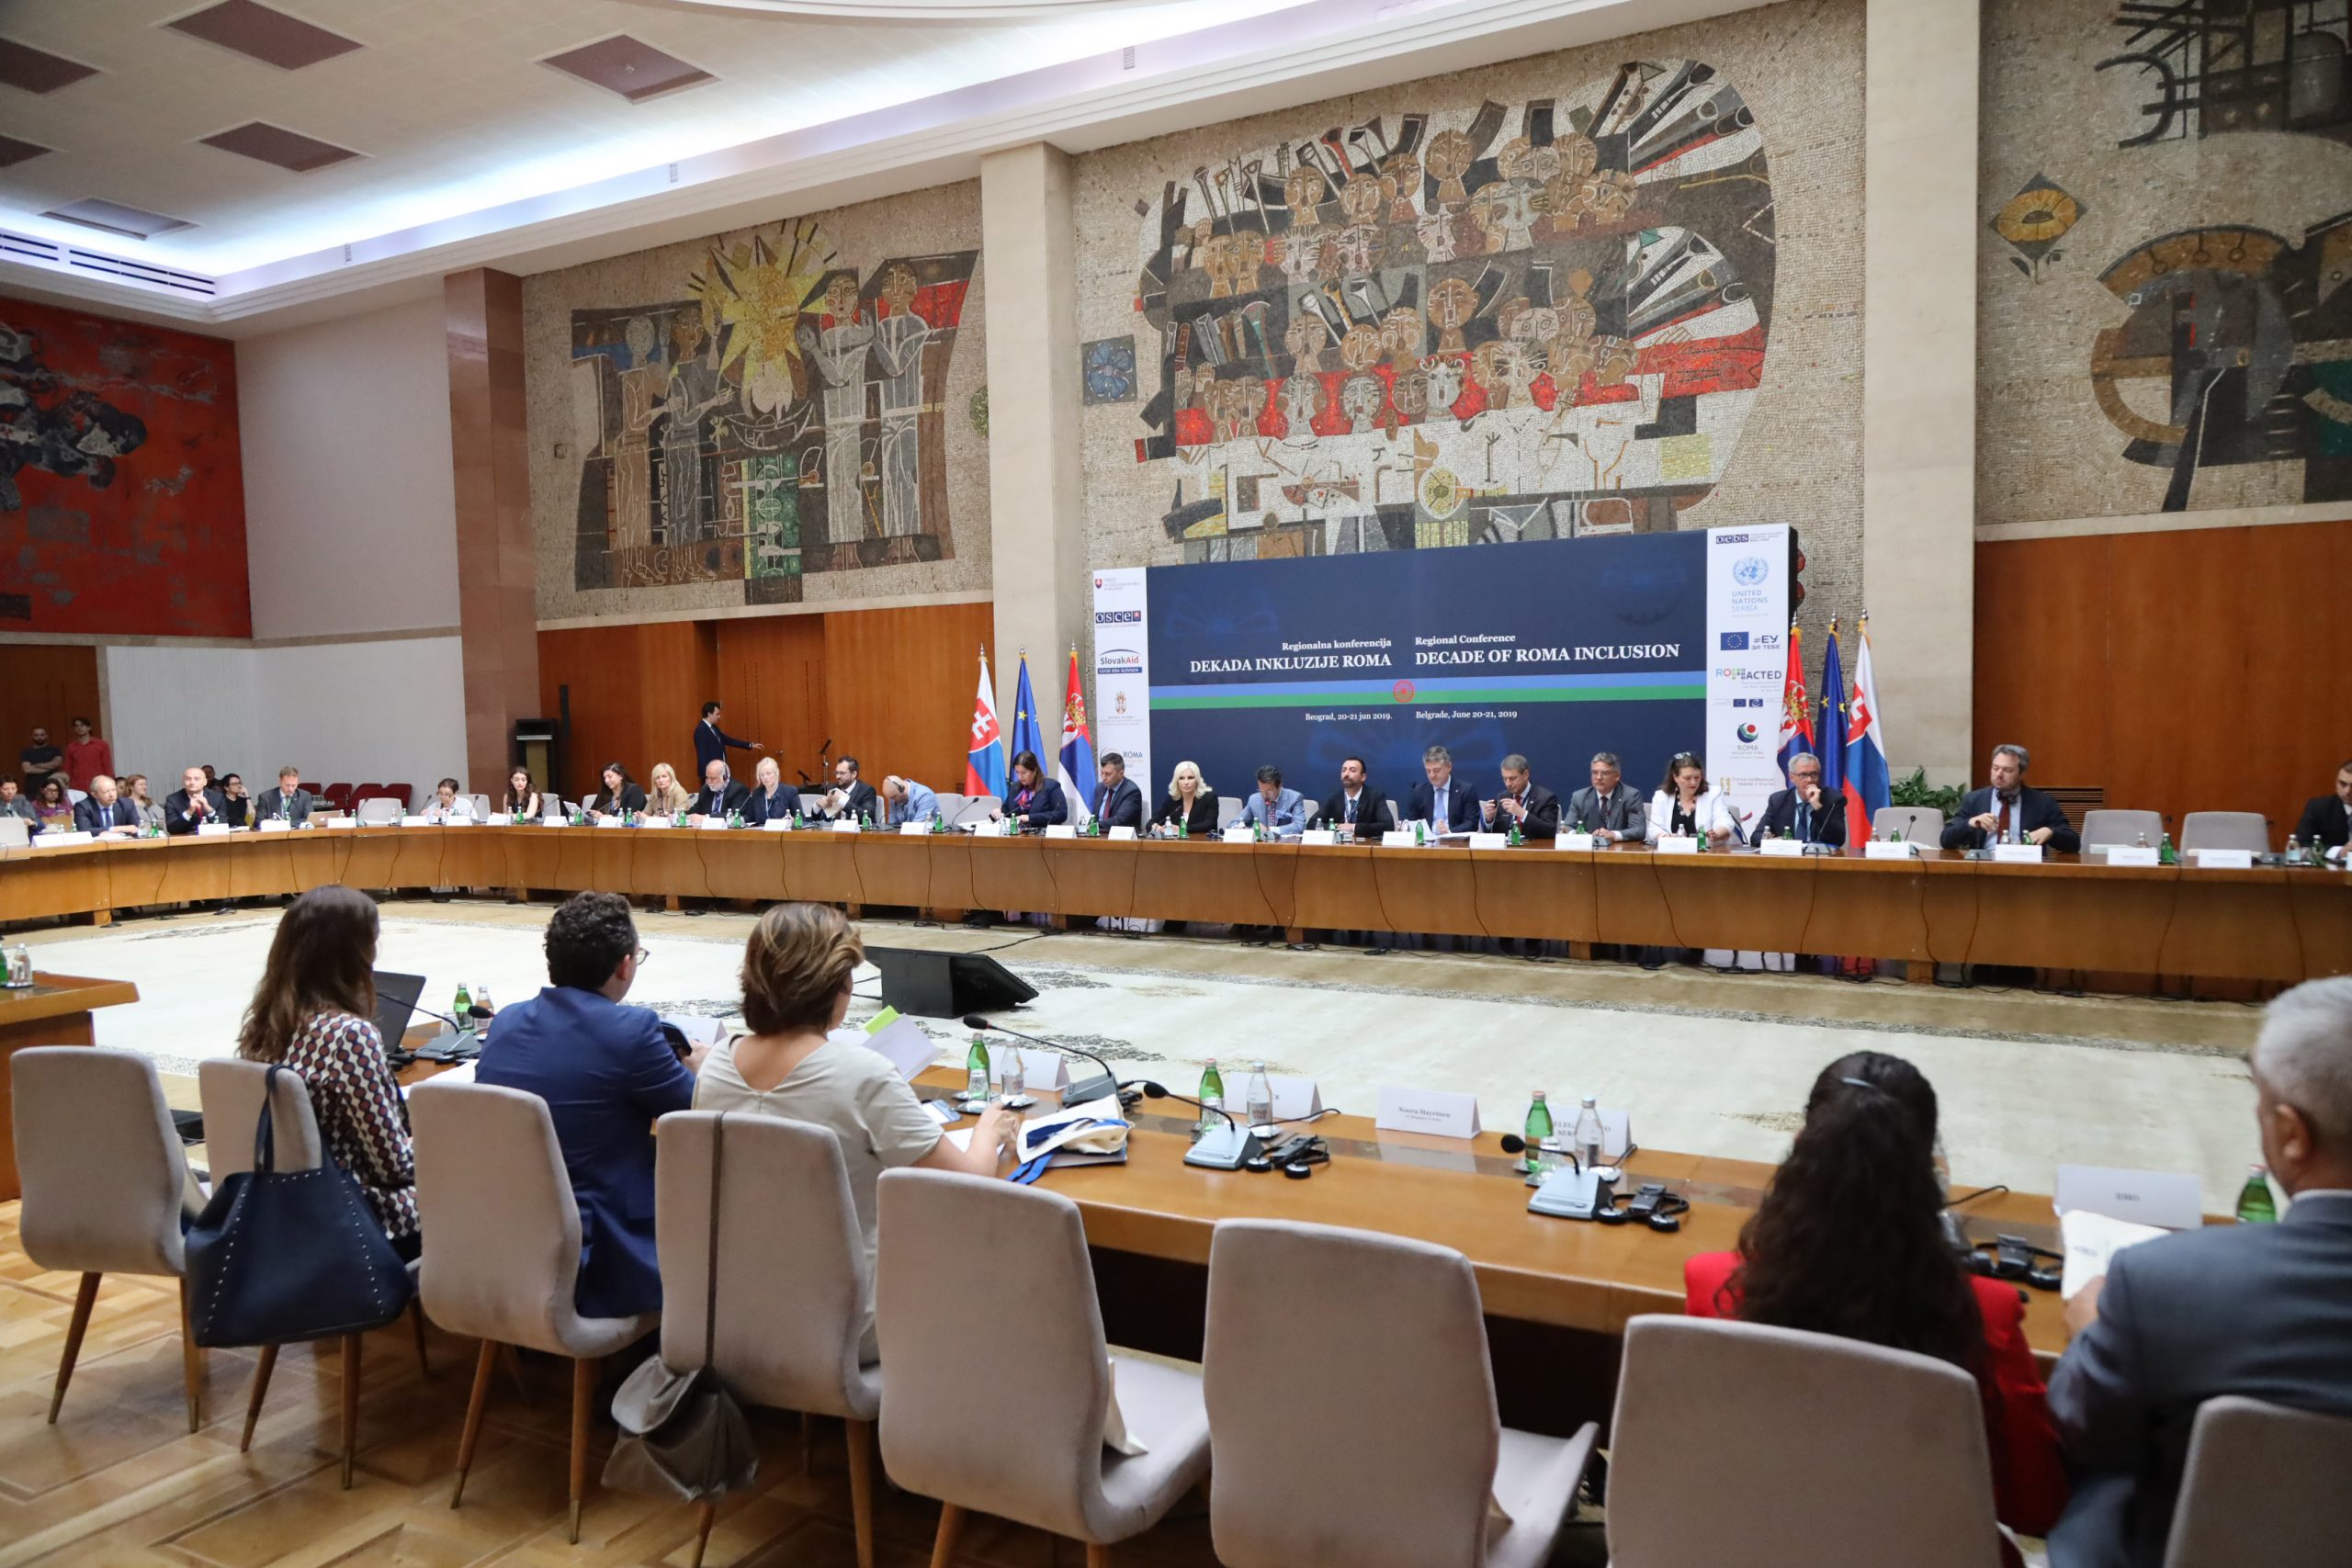 Regional conference held on the results of “Decade of Roma Inclusion”